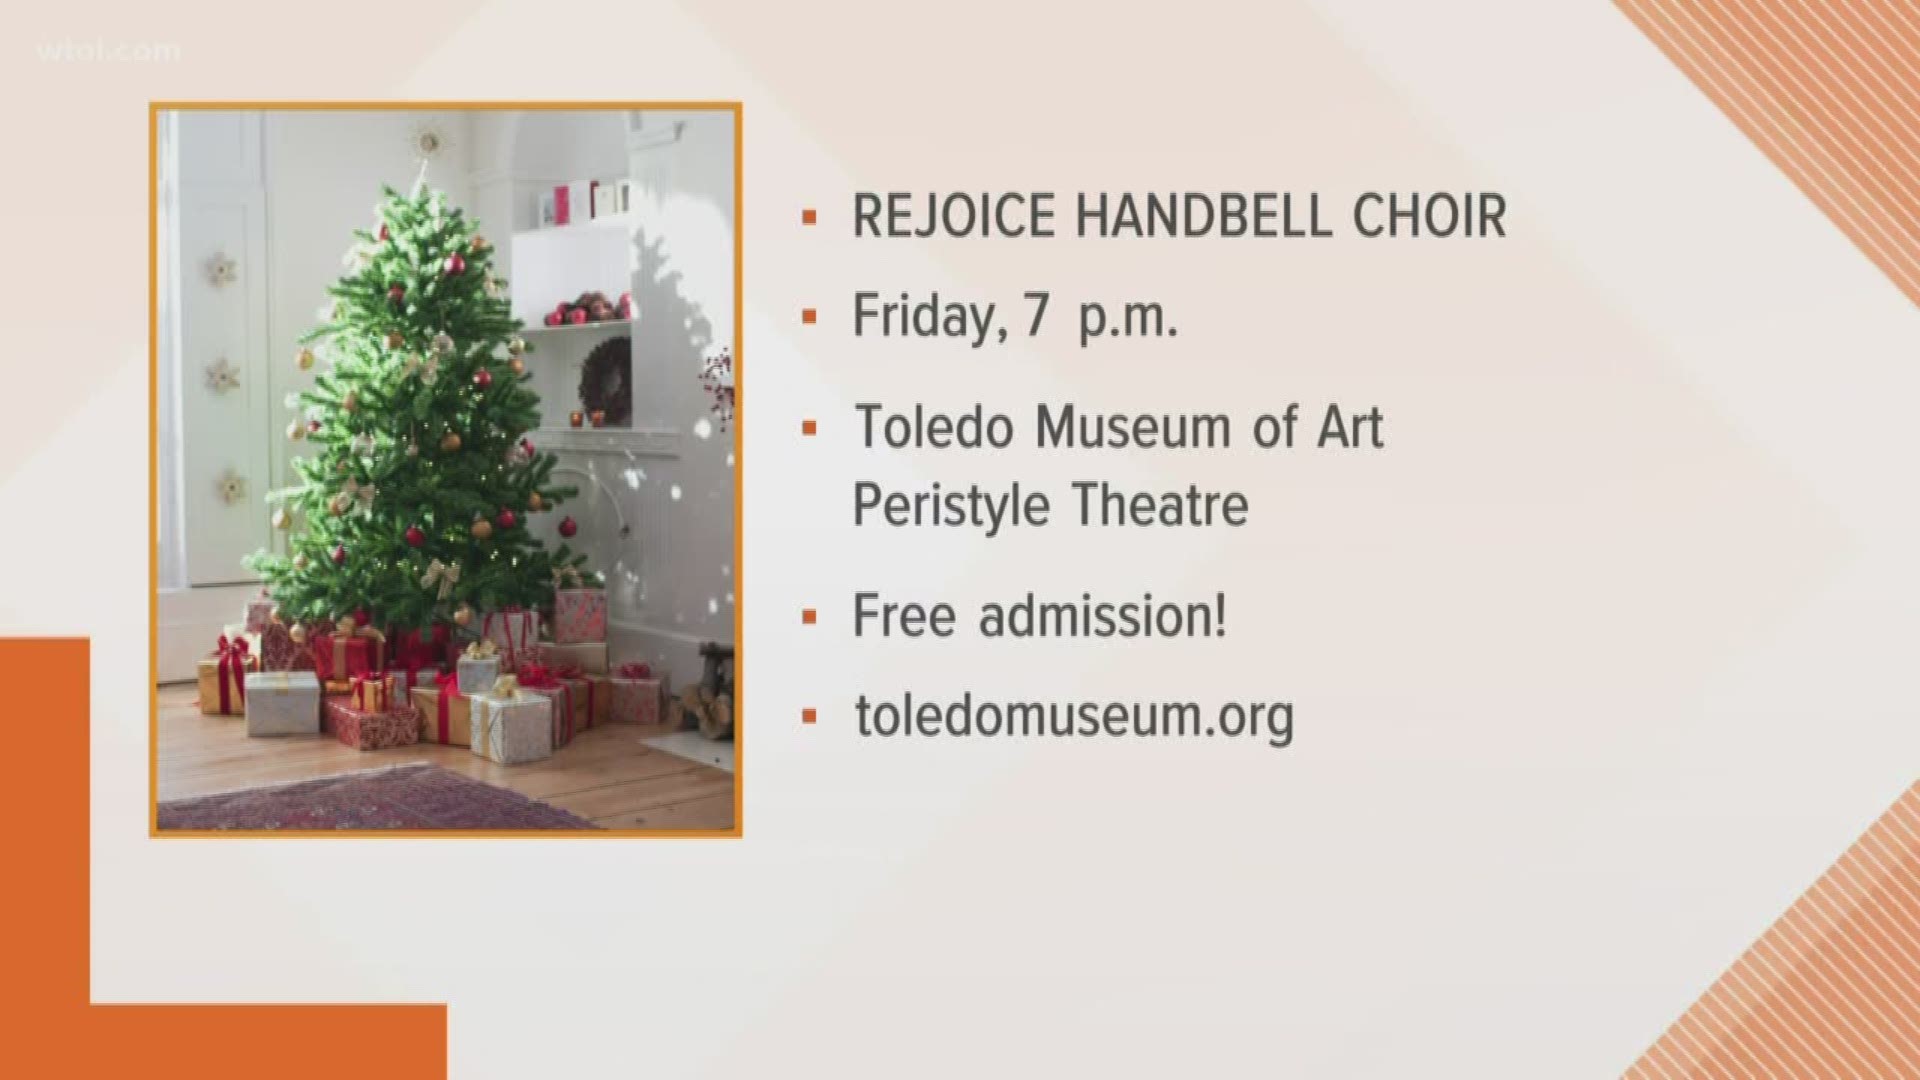 There are silver bells and jingle bells, and now you can hear handbells at the Rejoice Handbell Choir's free concert this weekend at the Toledo Museum of Art!